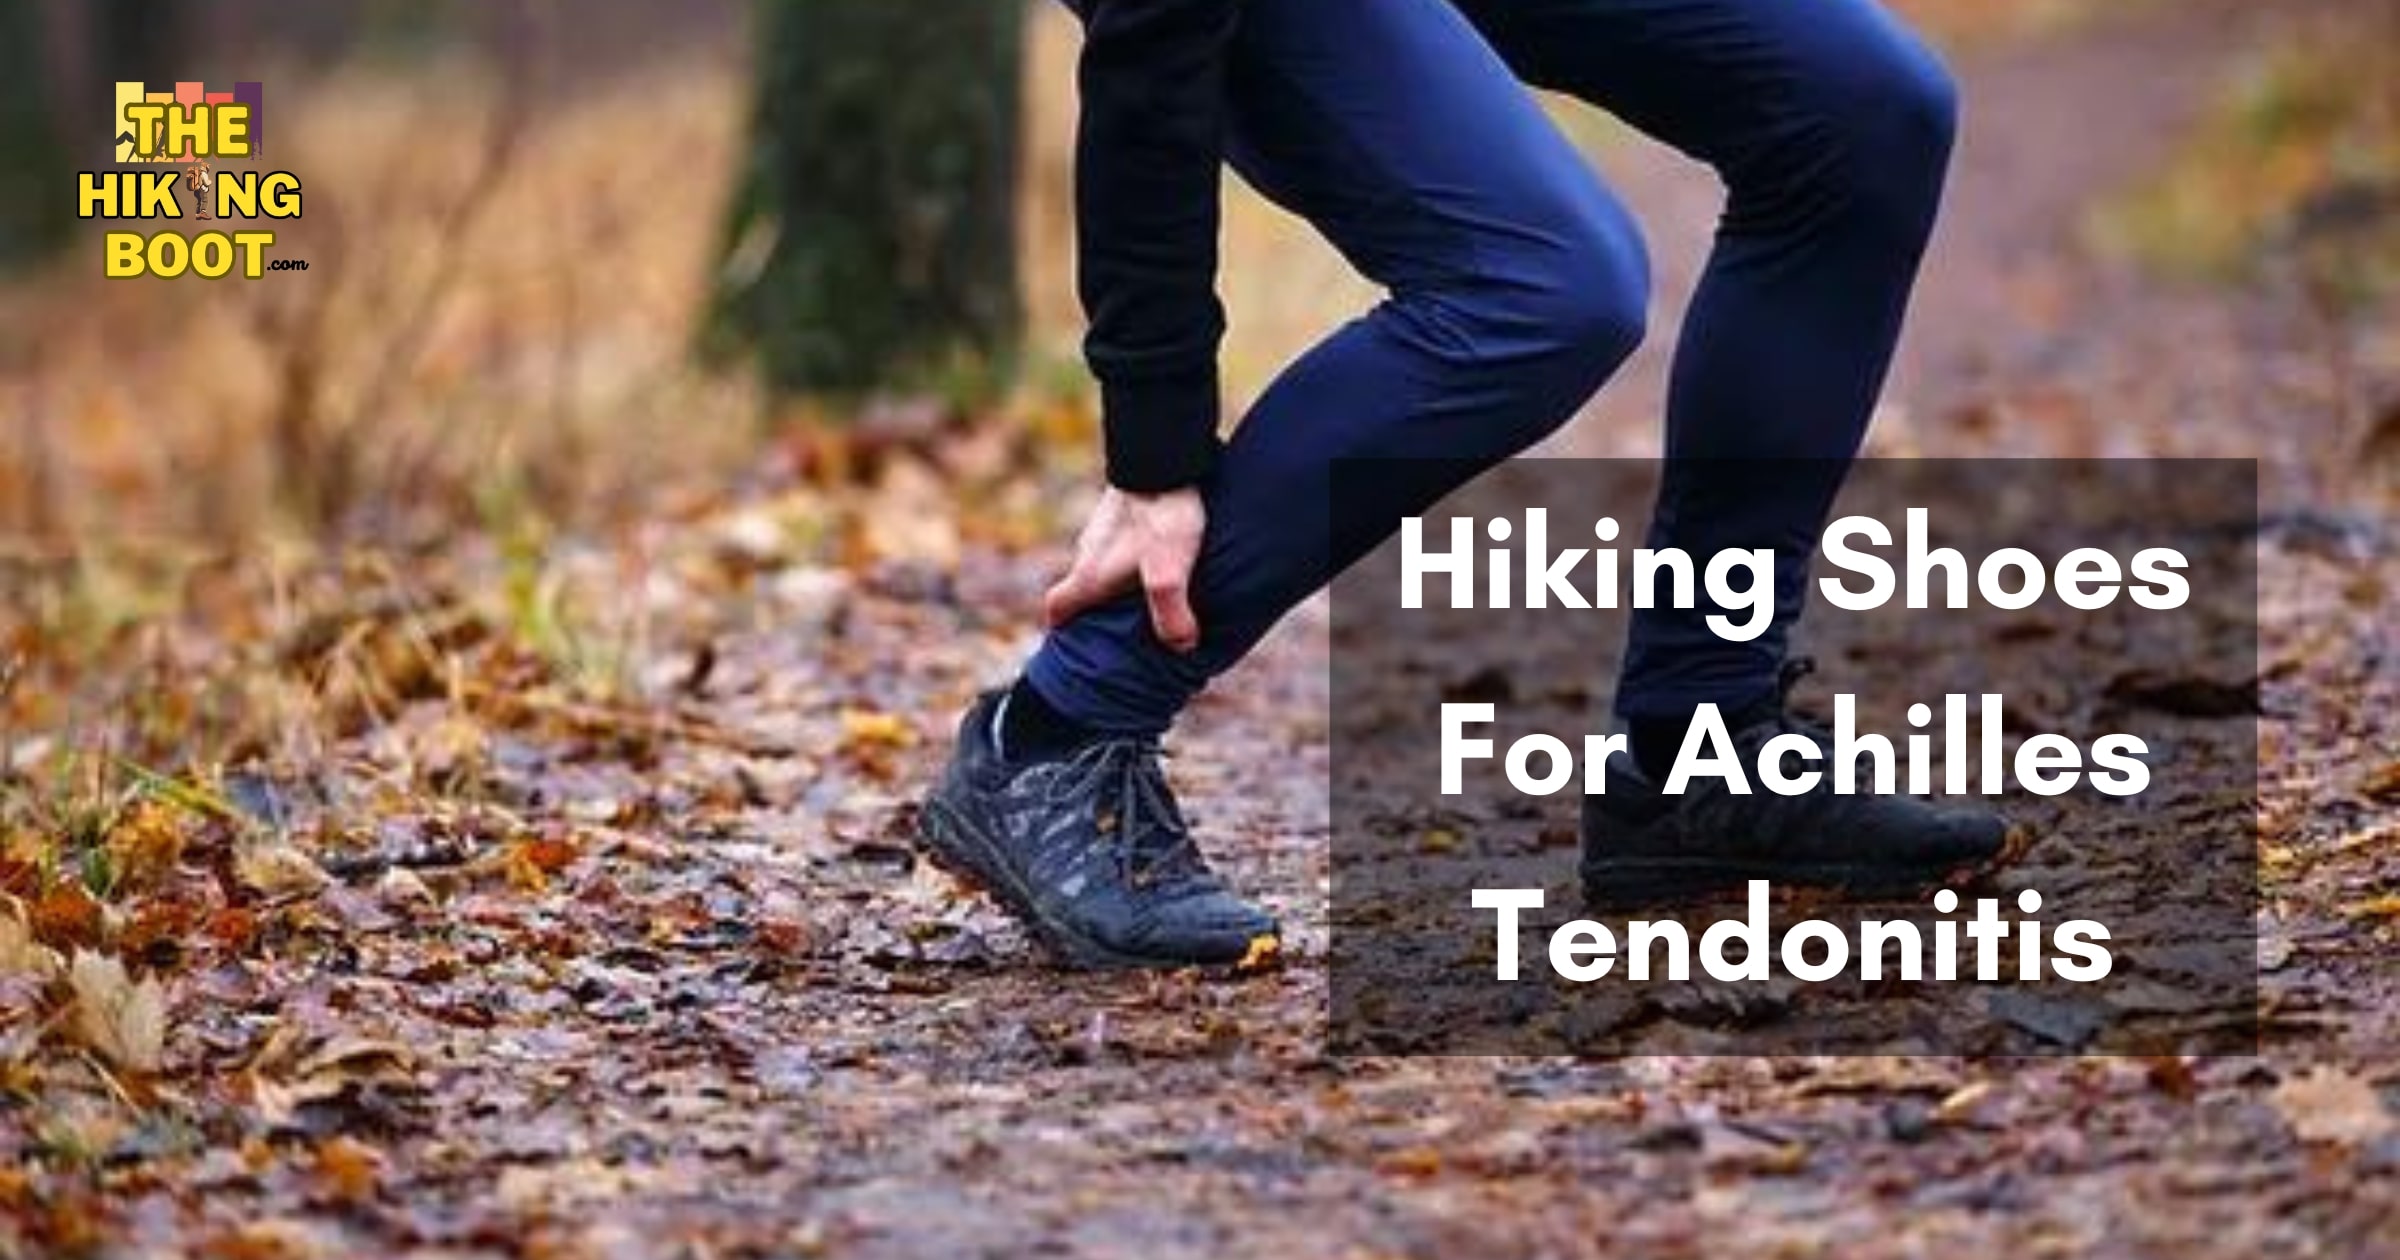 Hiking Shoes For Achilles Tendonitis